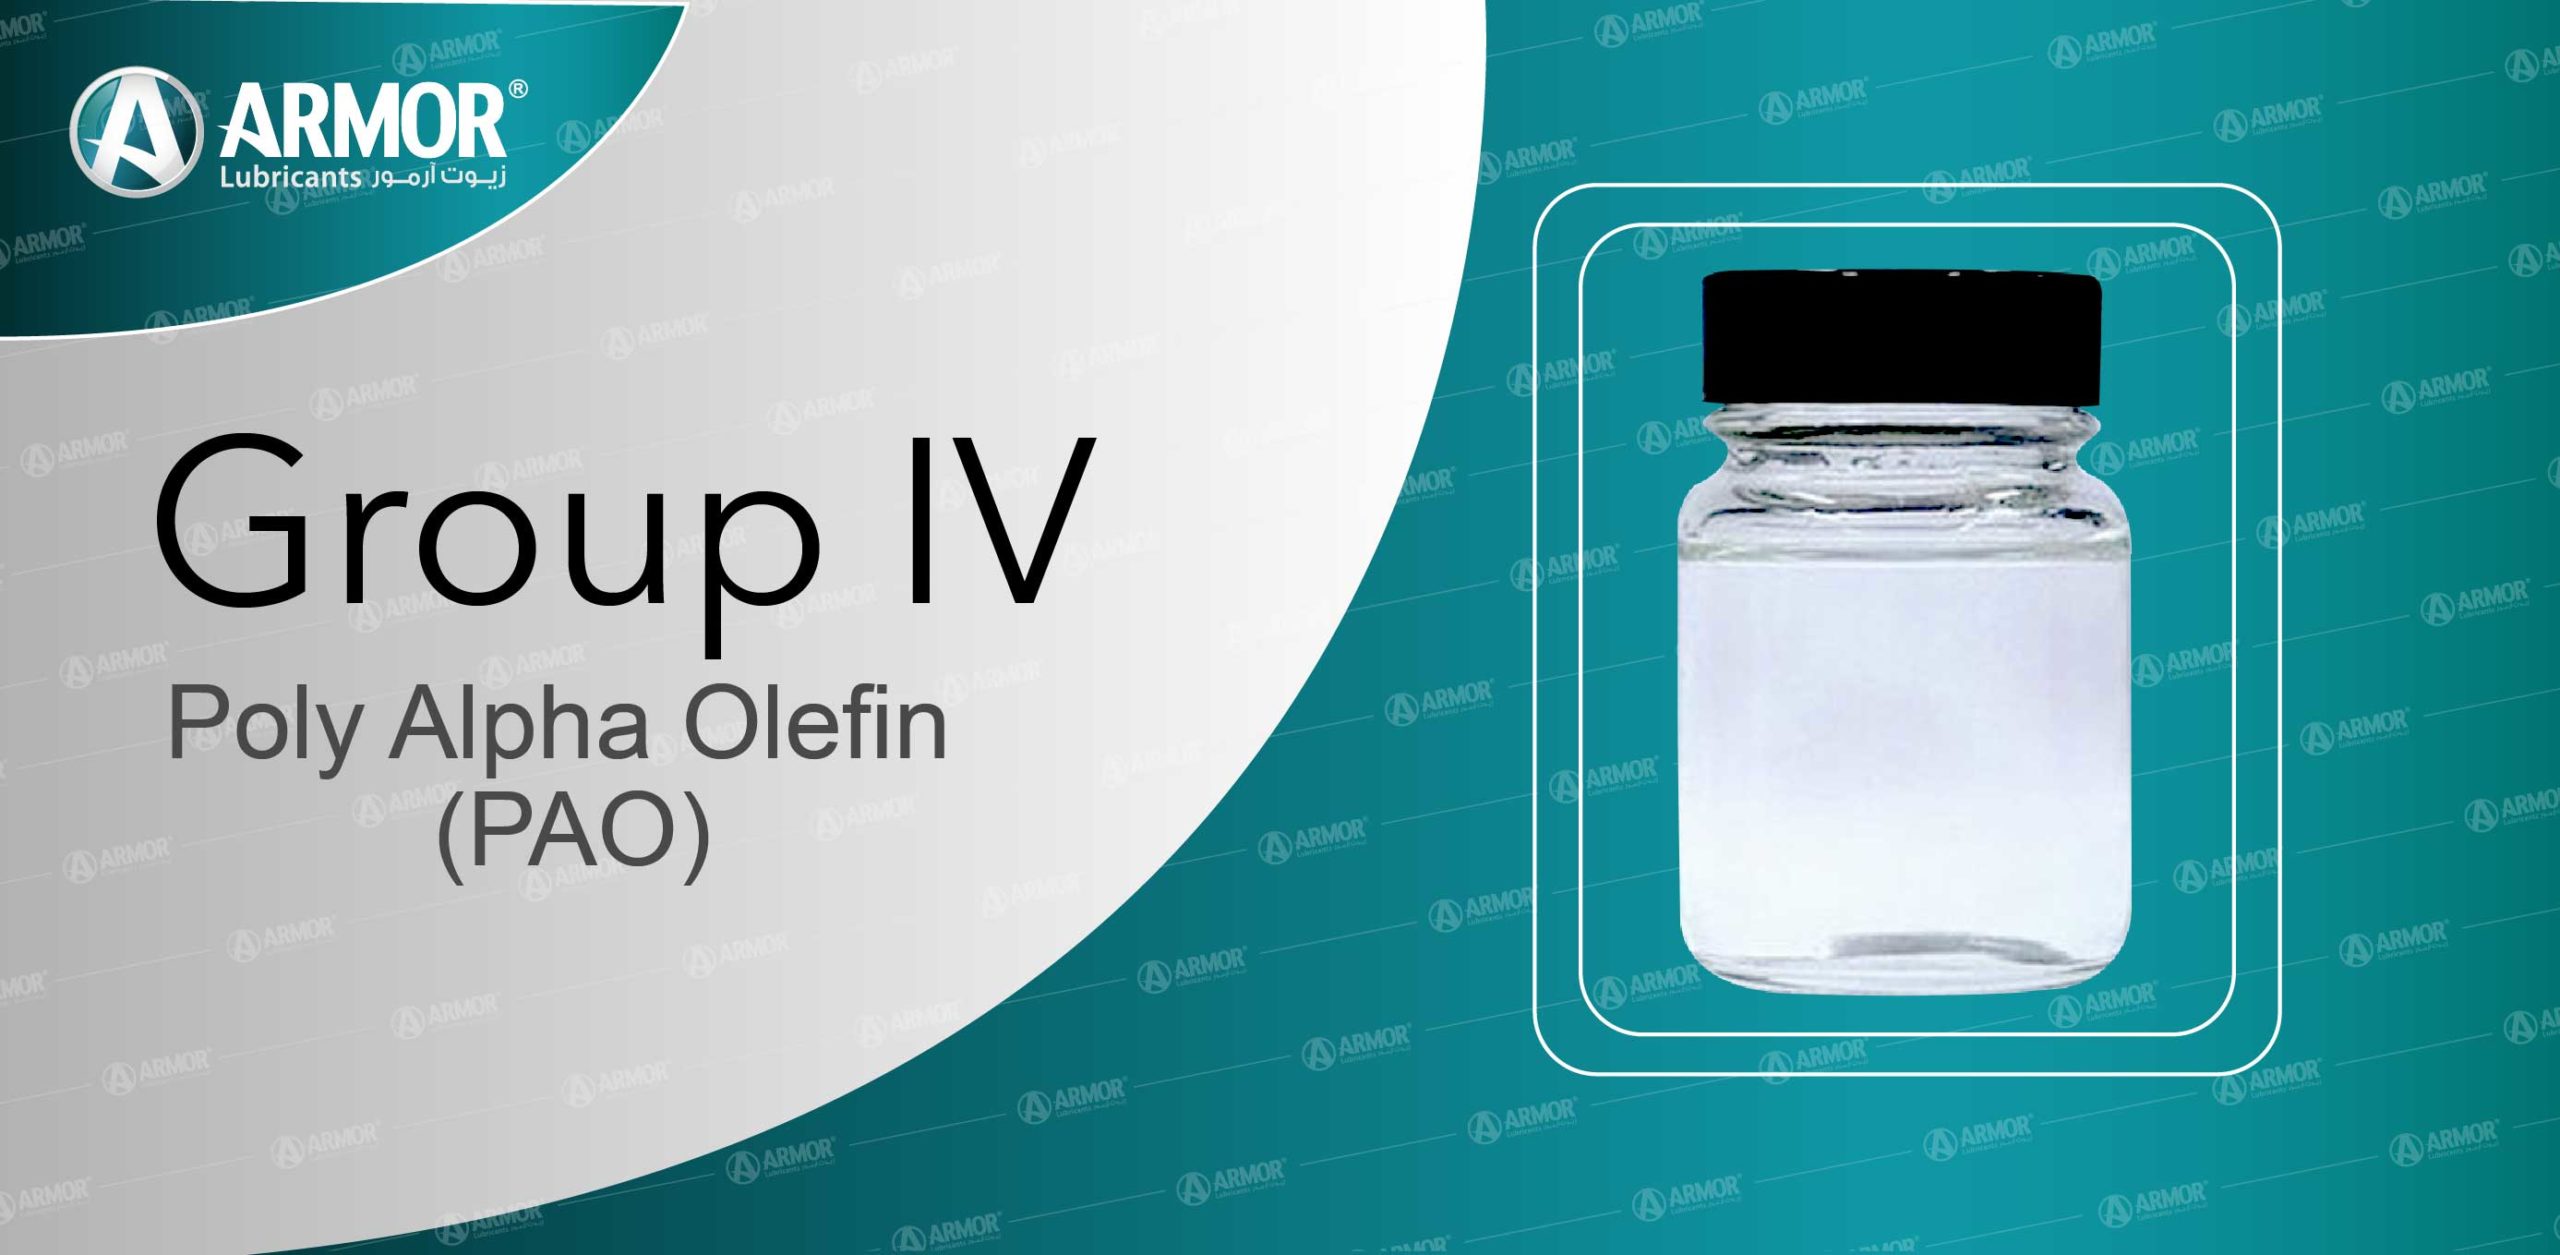 Group 1V fully synthetic oil made from polyalphaolefins,